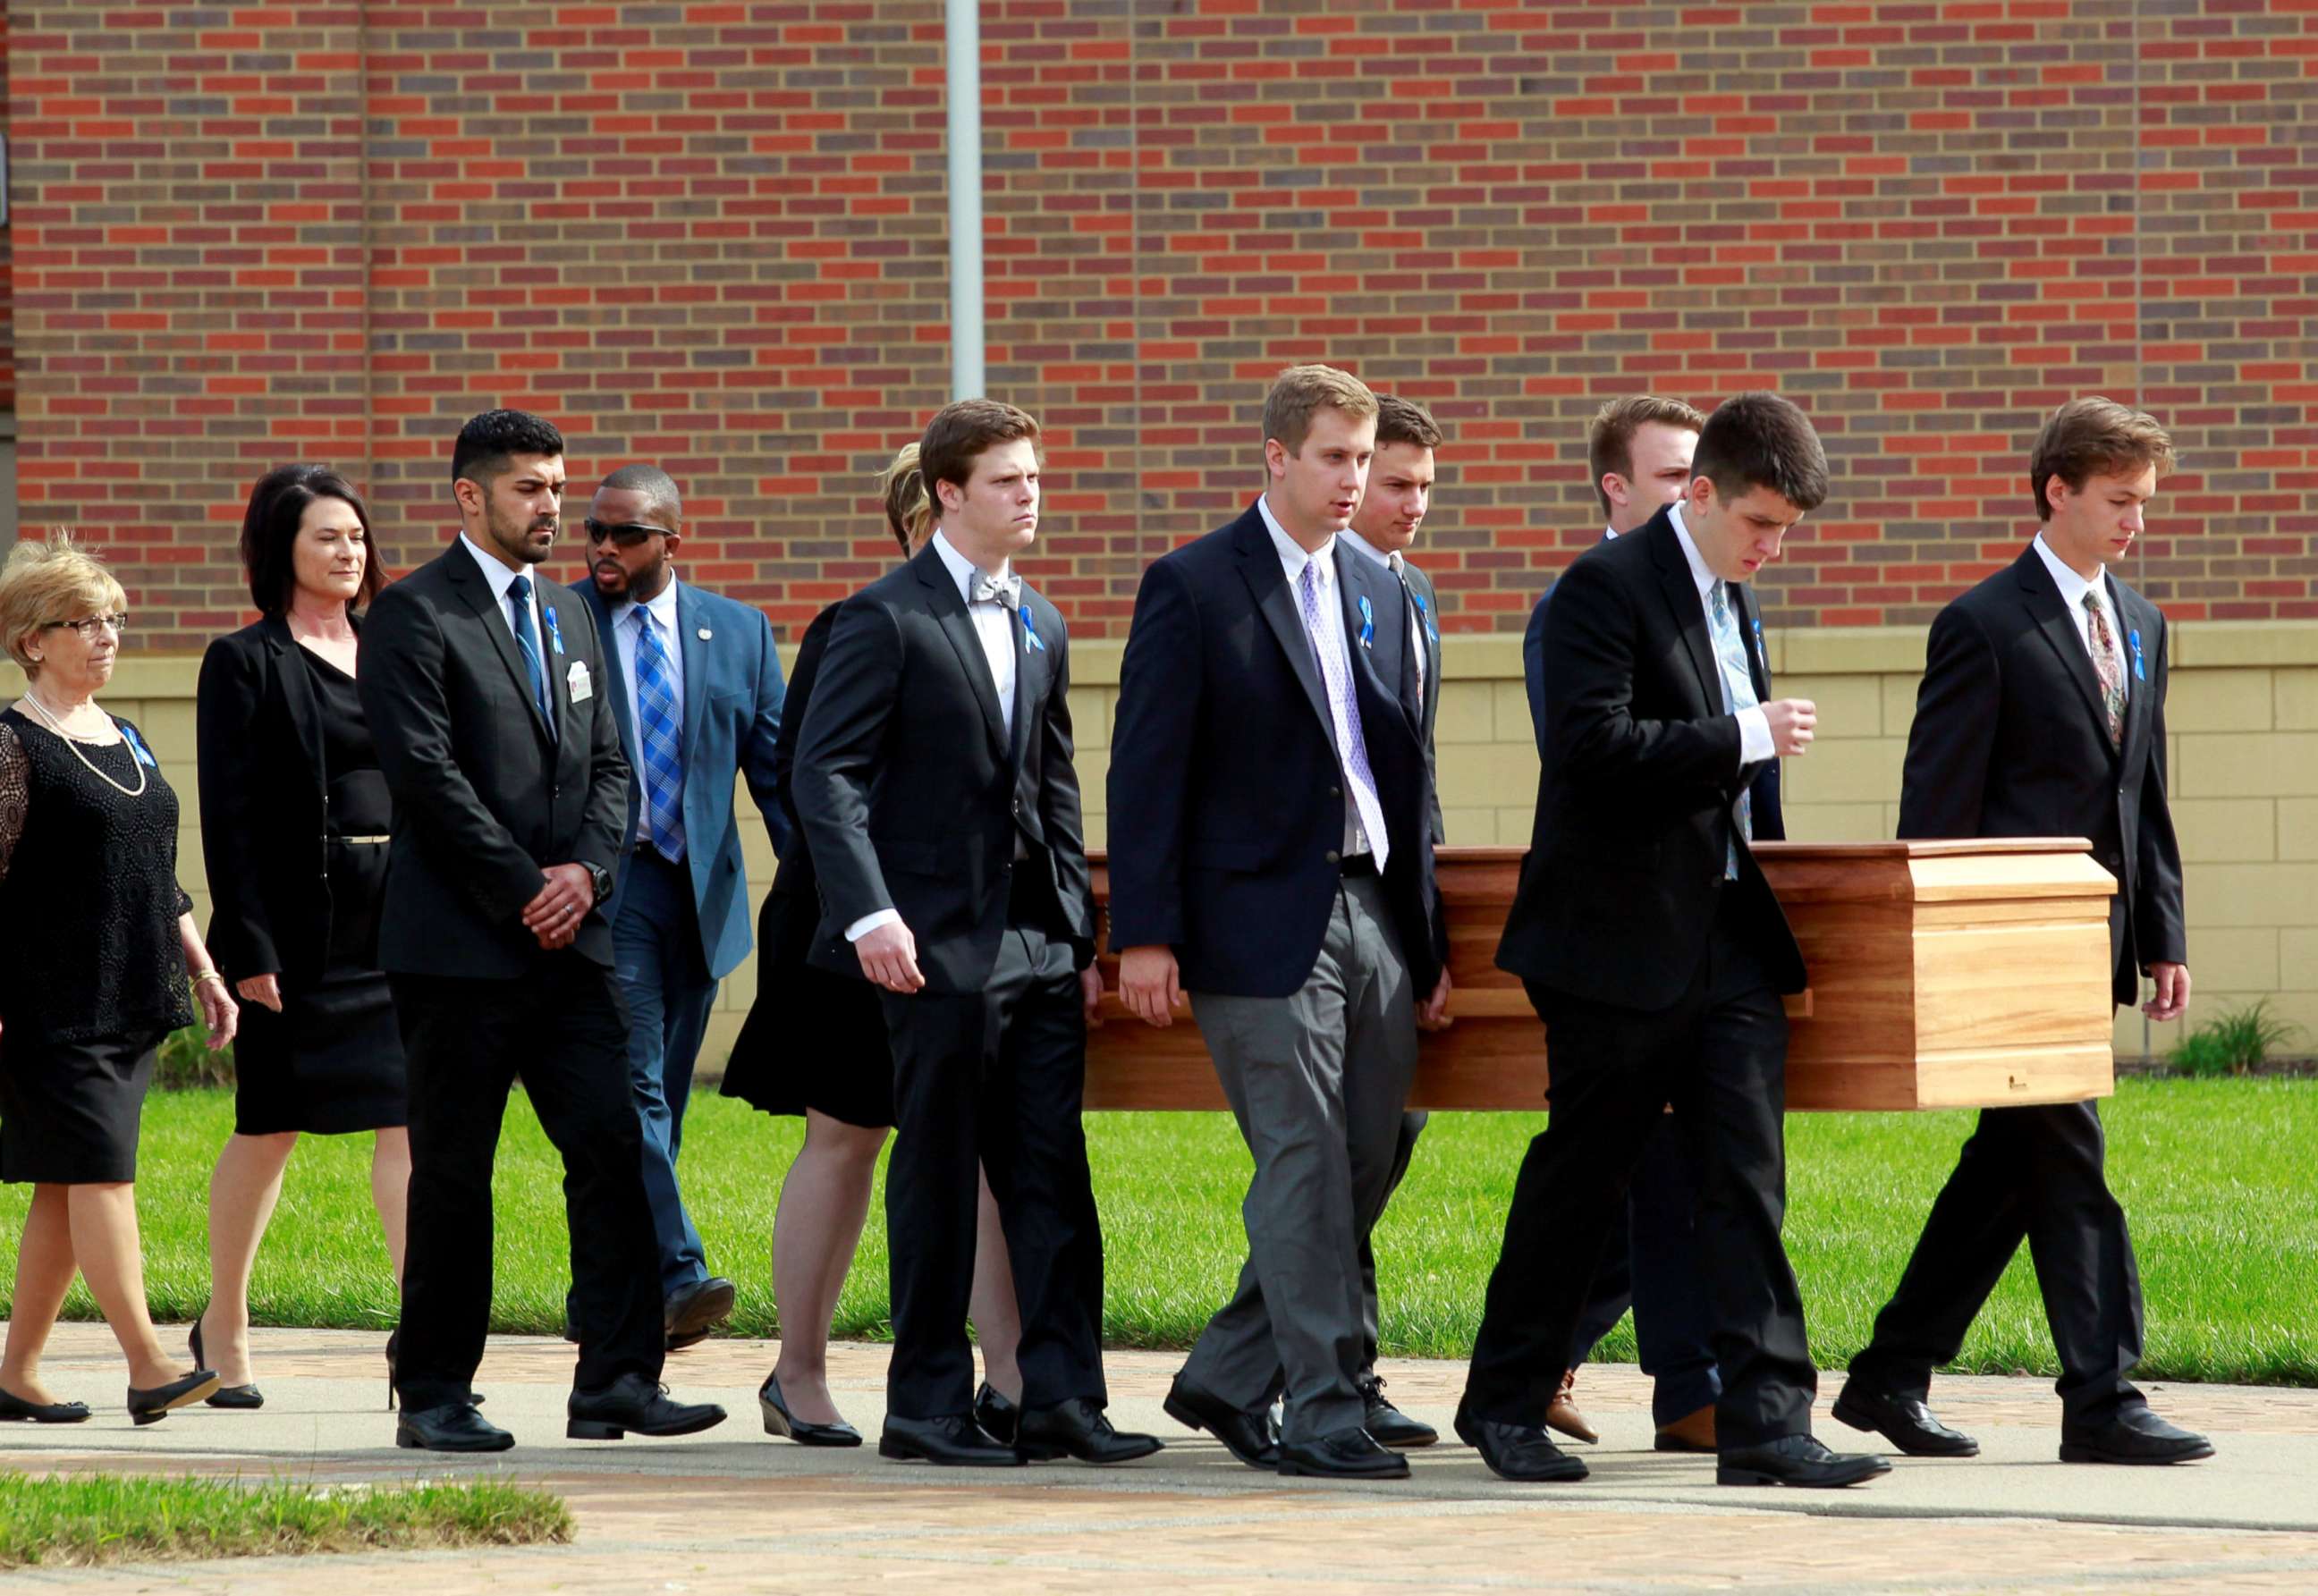 PHOTO: Otto Warmbier's casket is carried to the hearse followed by his family and friends after a funeral service for Warmbier, who died after his release from North Korea detention in a coma, at Wyoming High School in Wyoming, Ohio, June 22, 2017.  